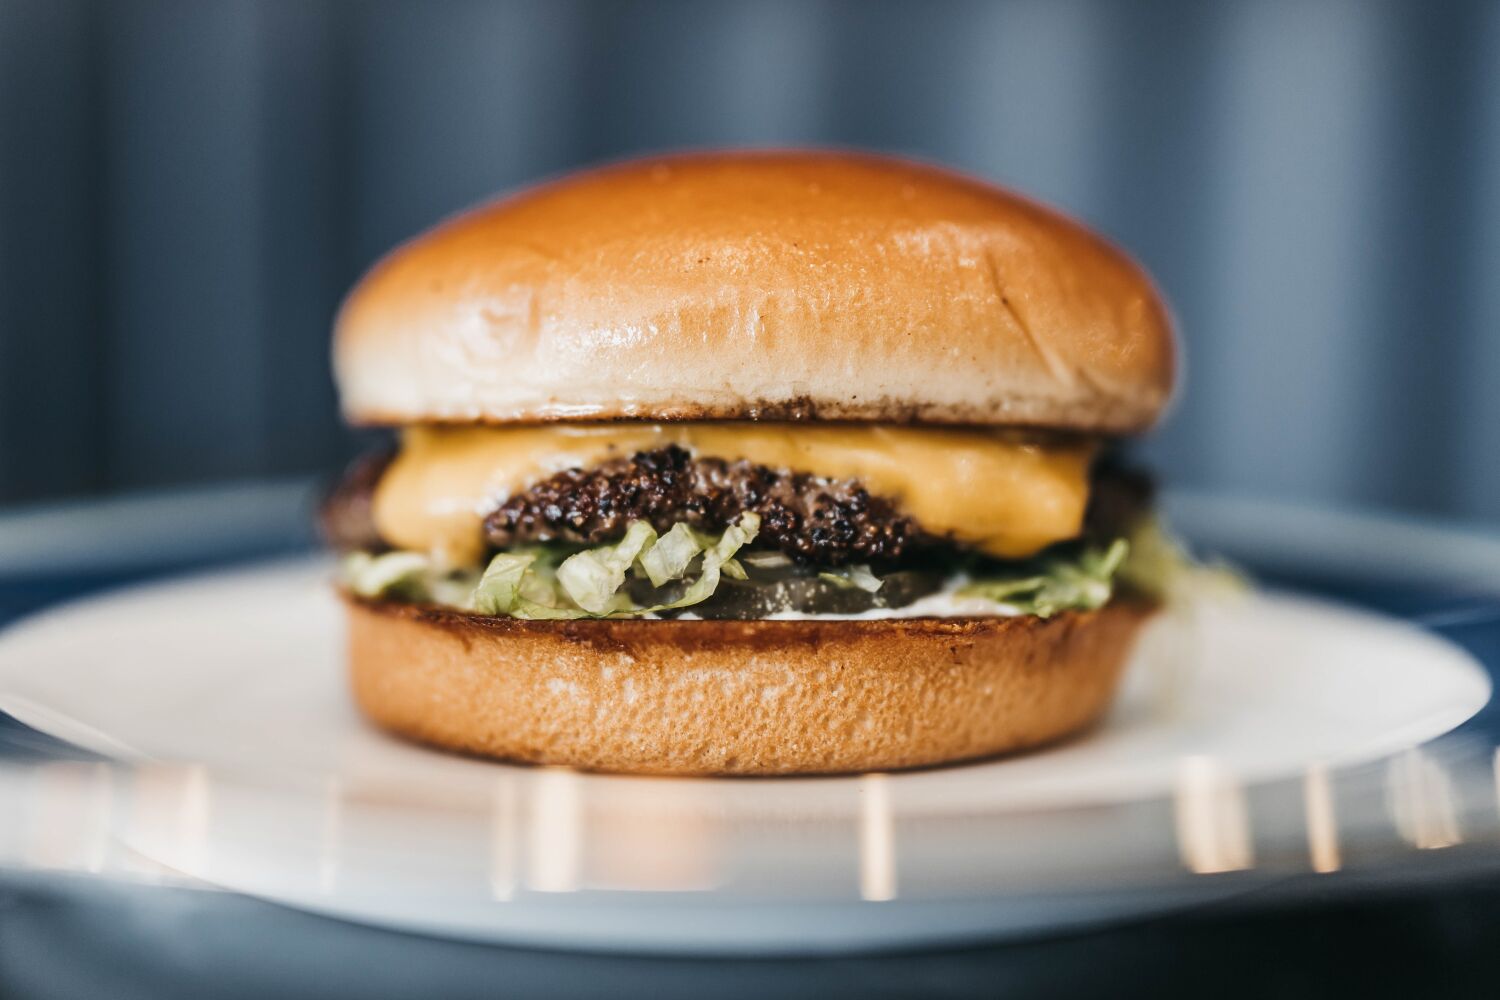 Everything is under $10 at this new Fairfax burger joint from L.A. dining veterans